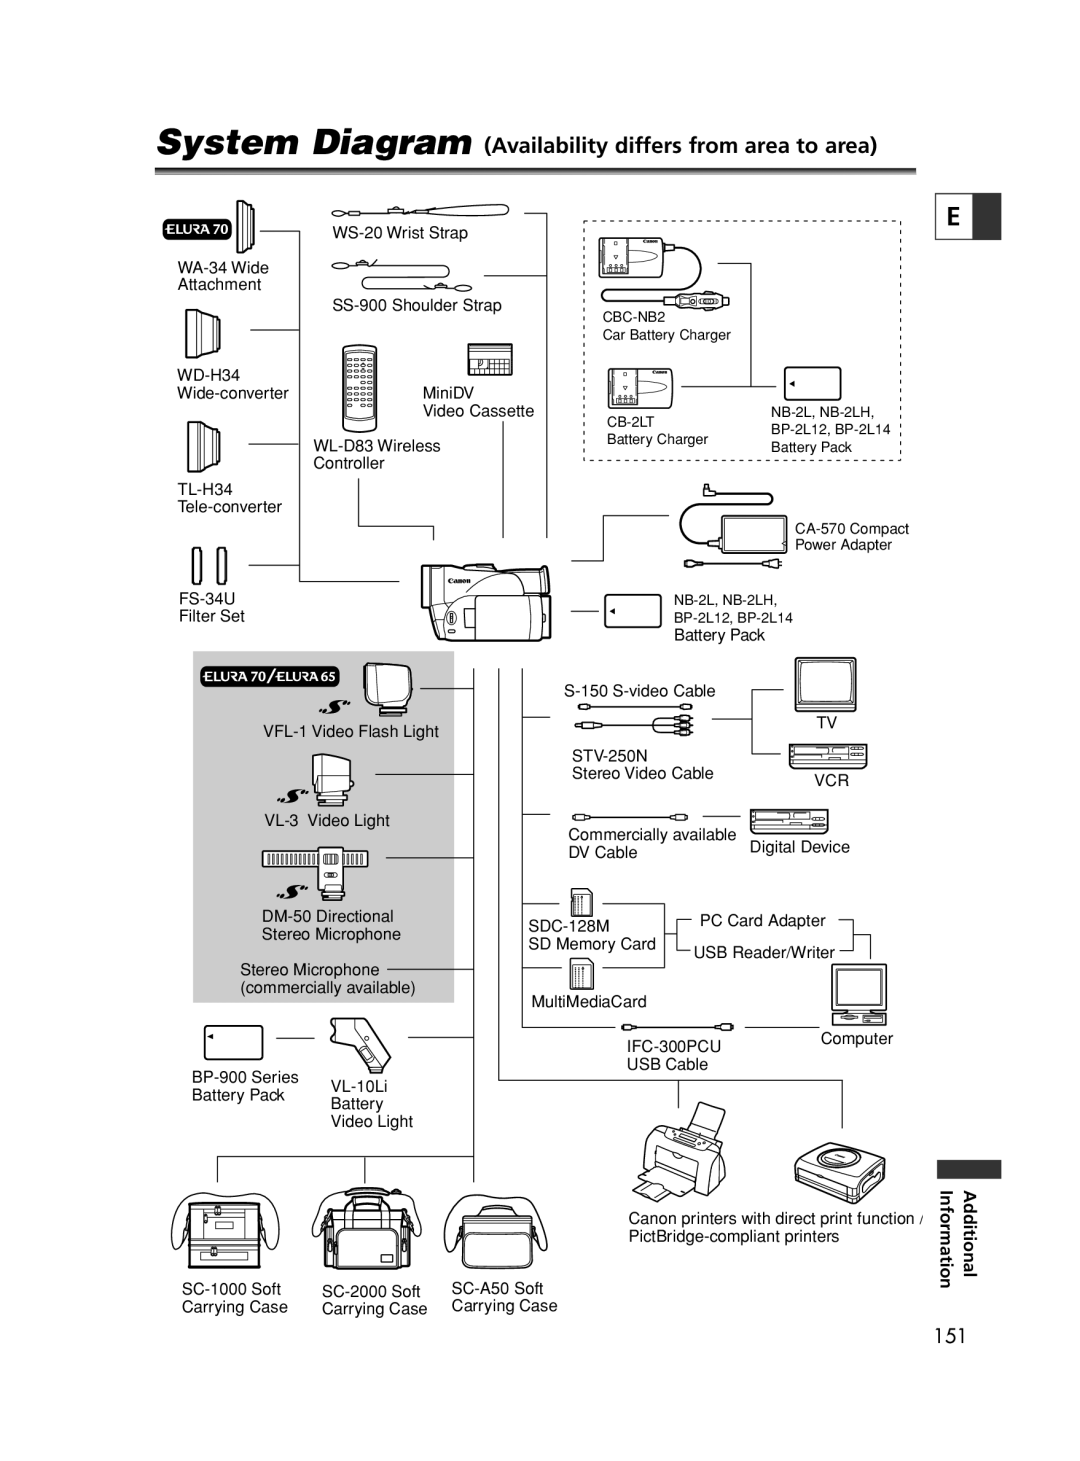 Canon 65, 60 System Diagram Availability differs from area to area, CA-570 Compact Power Adapter, VFL-1 Video Flash Light 